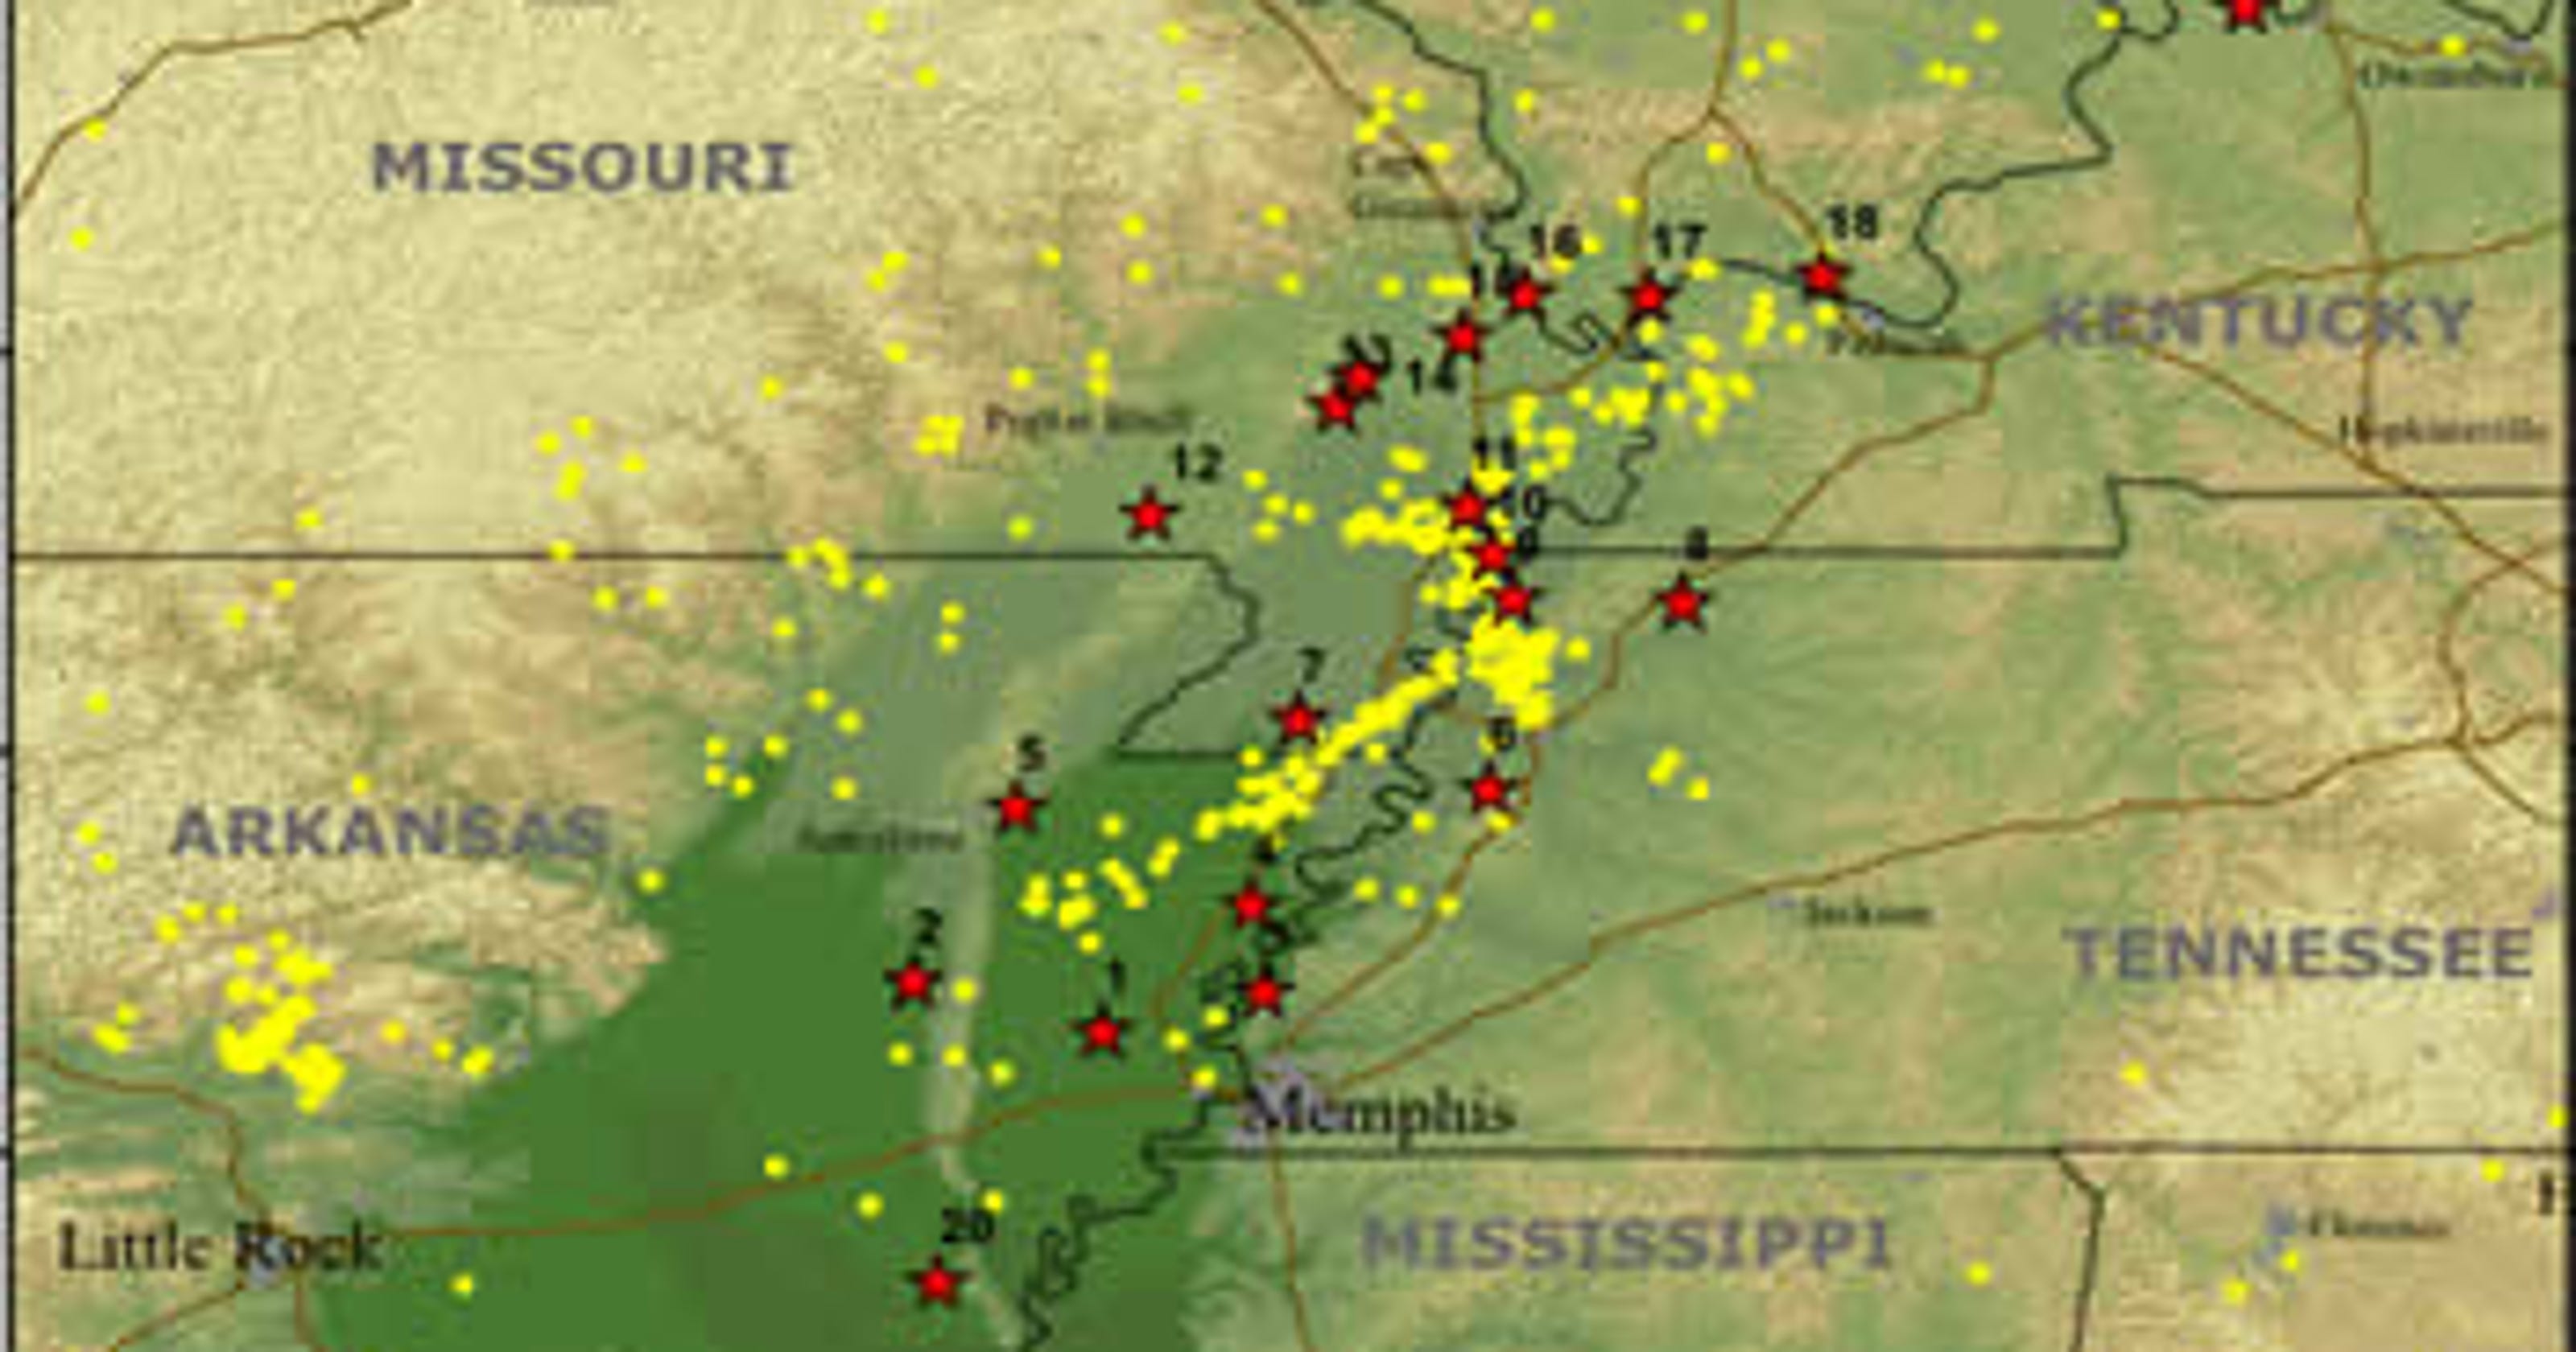 Earthquake Memphis What would the potential hazard be?